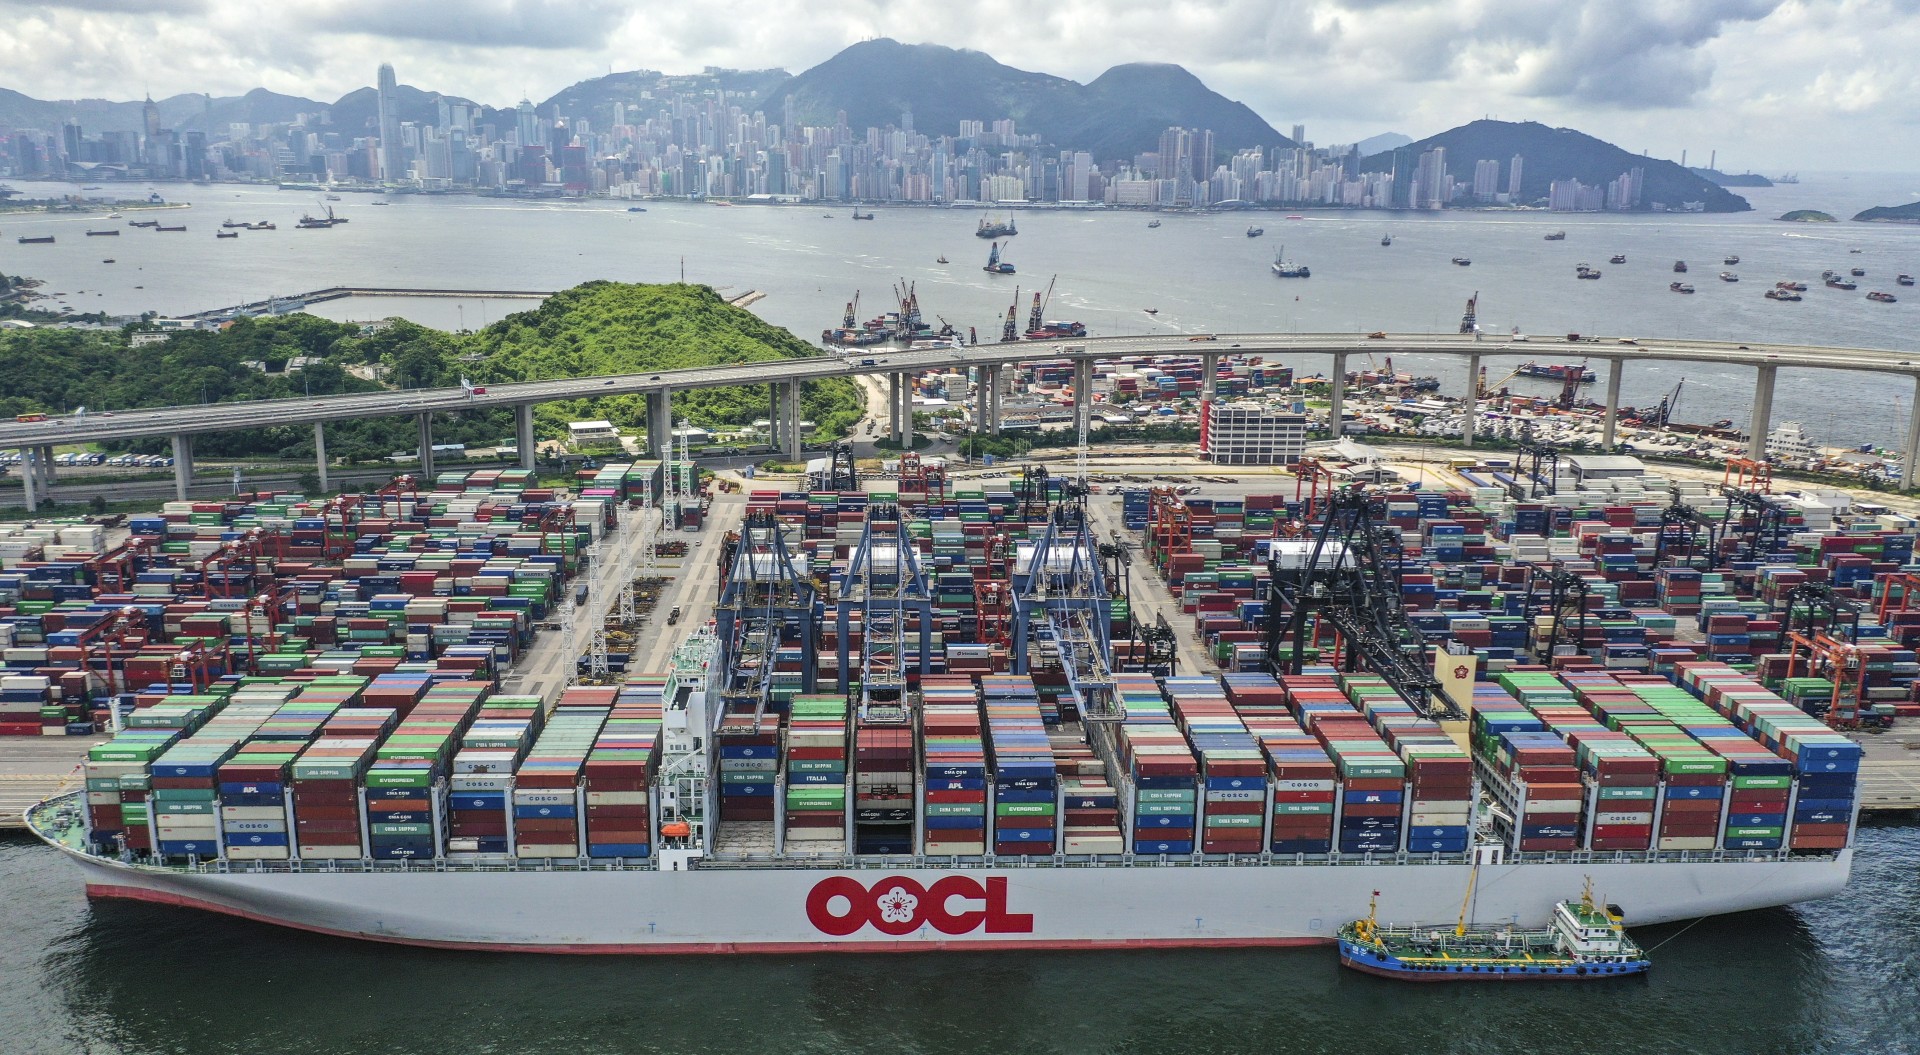 Arrival Of Oocl S Massive Cargo Container Vessel In Hong Kong Heralds China S Growing Power In Shipping South China Morning Post